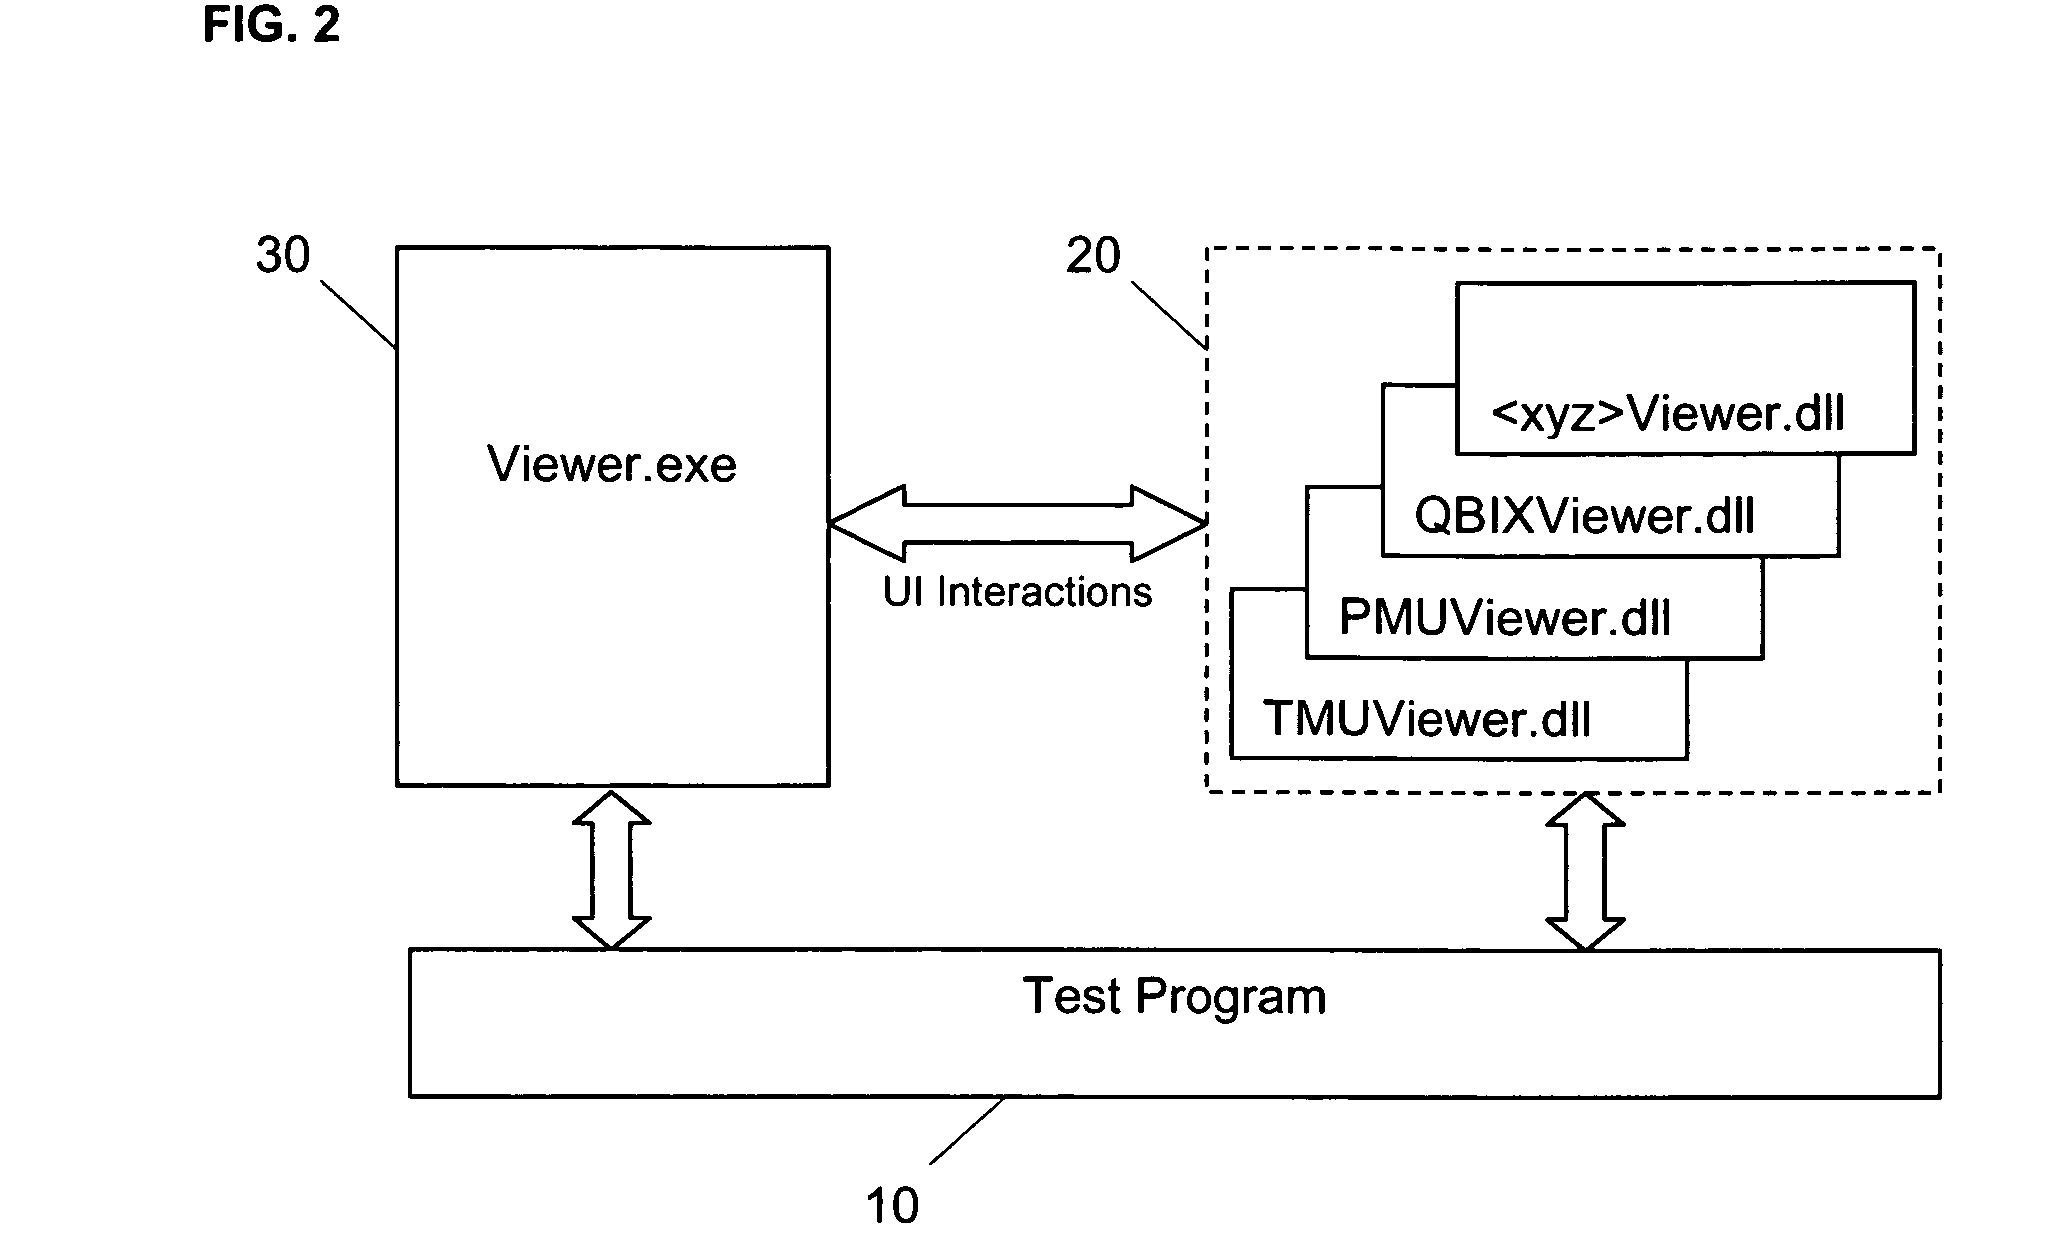 Viewer for test apparatus hardware